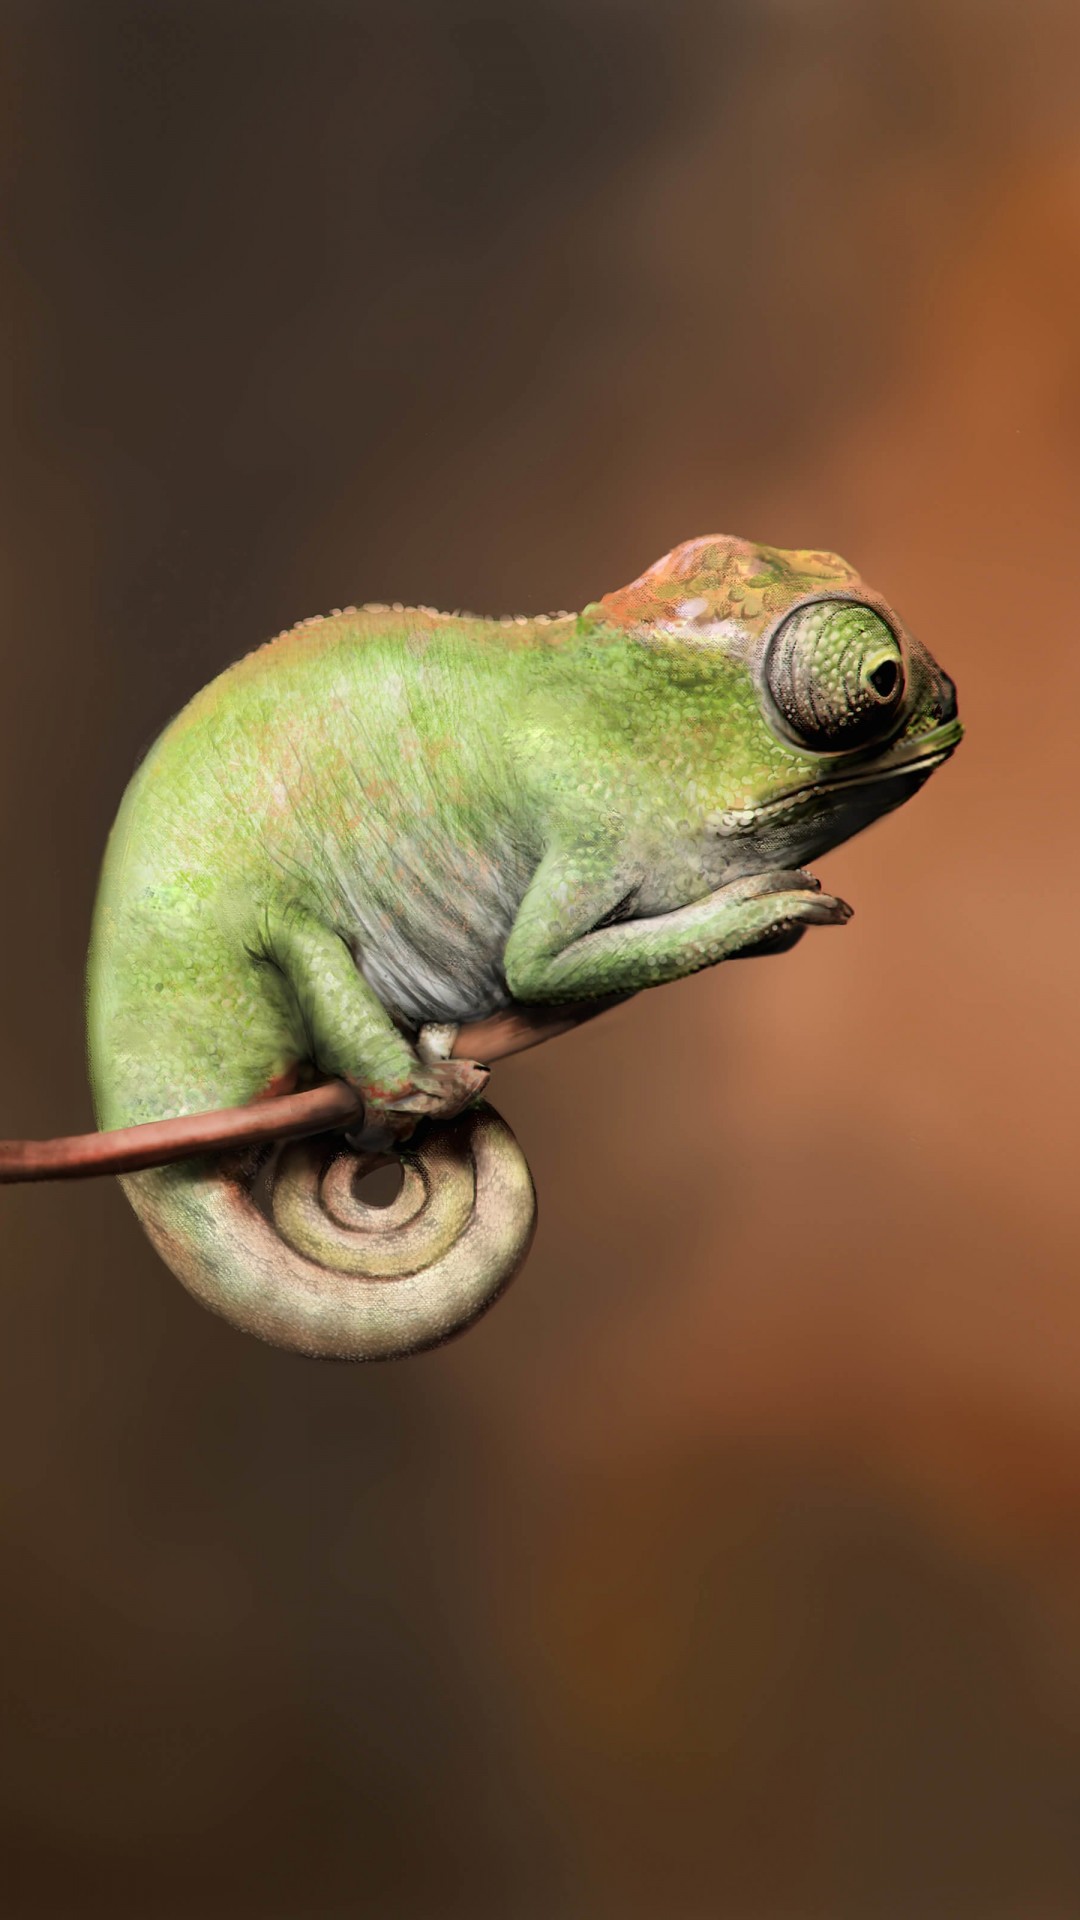 Baby Chameleon Perching On a Twisted Branch Wallpaper for Google Nexus 5X